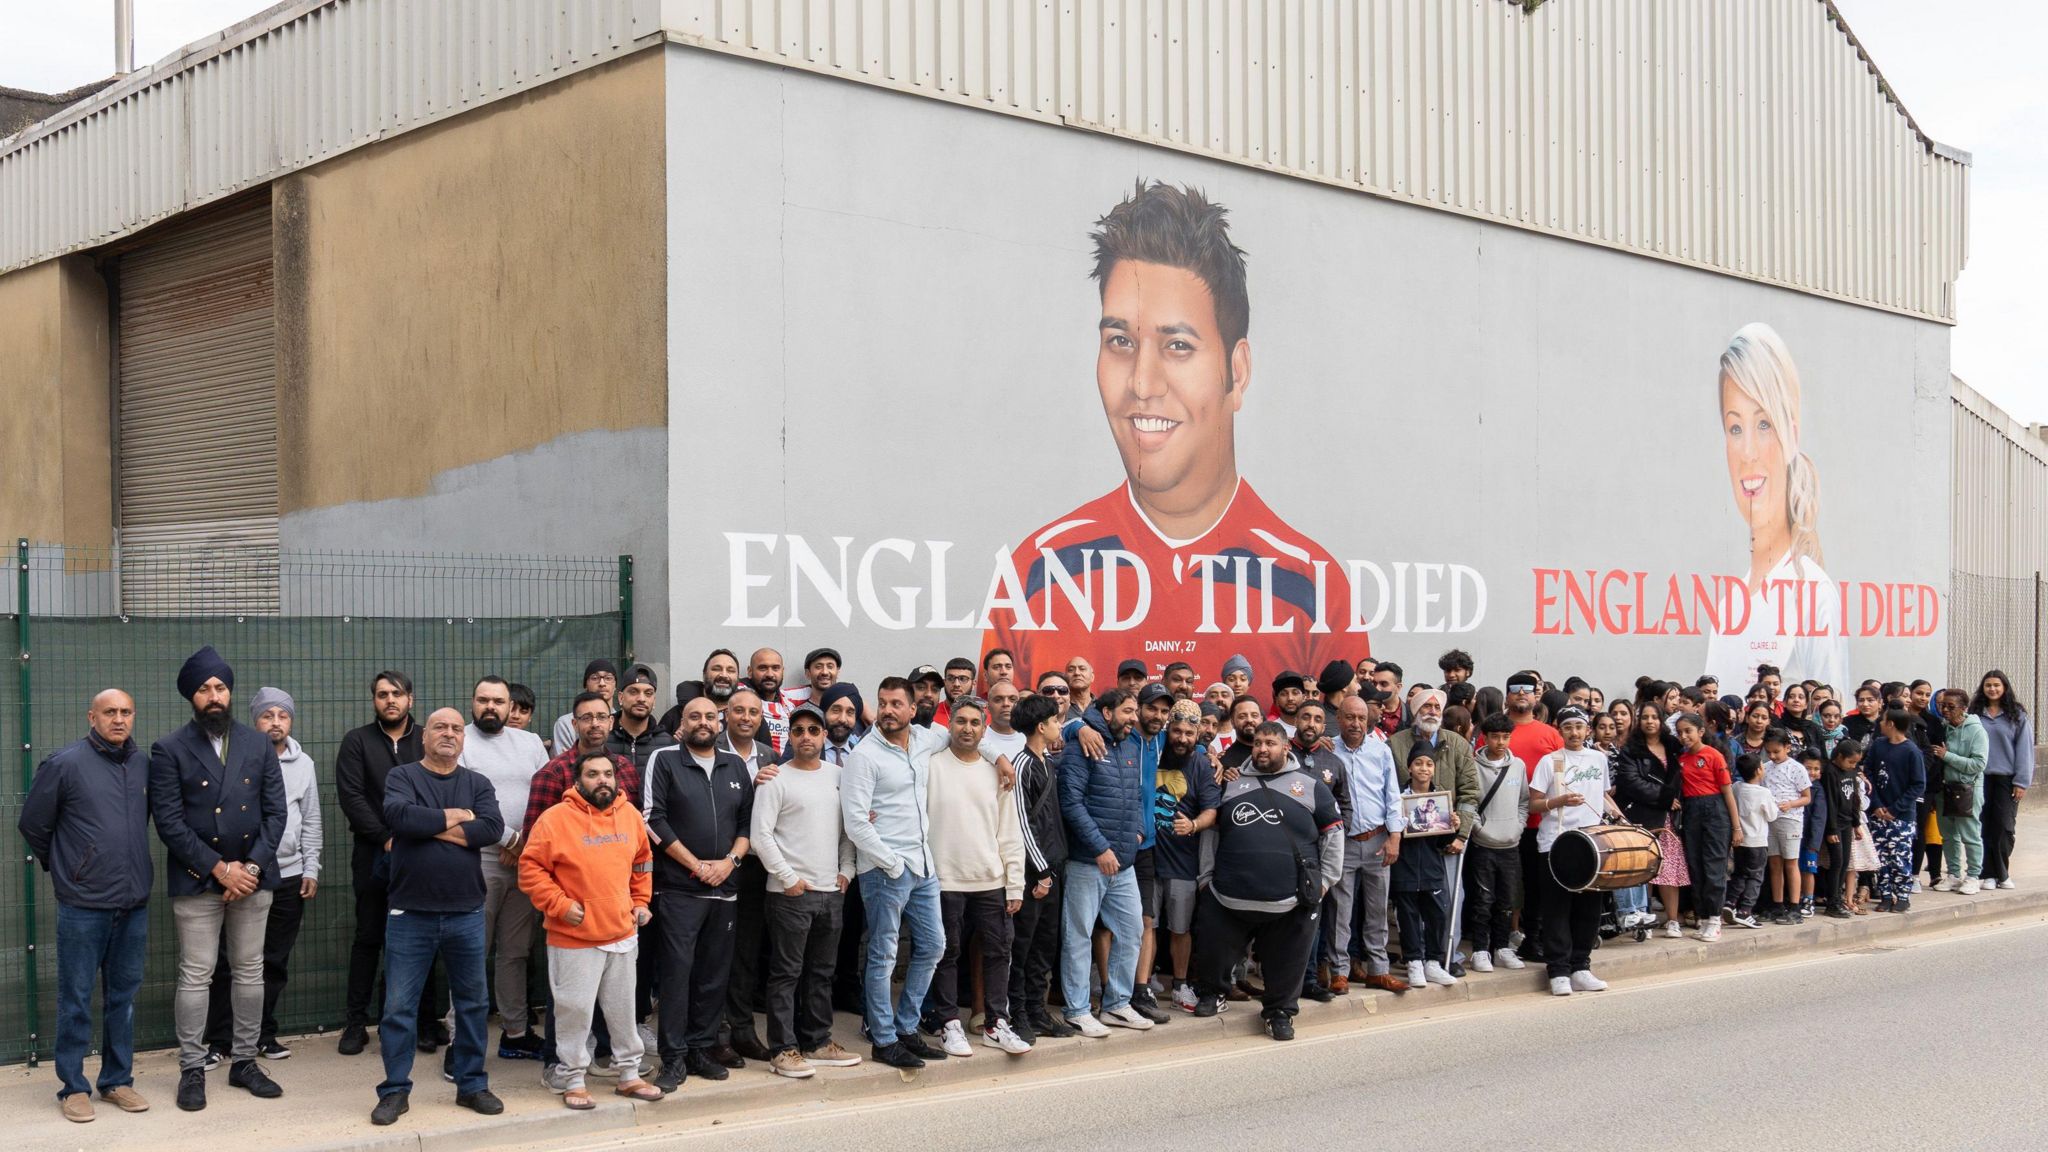 A large group of around 80 people standing in front of the mural, which depicts a young man and a young woman with the slogan 'England til I died'